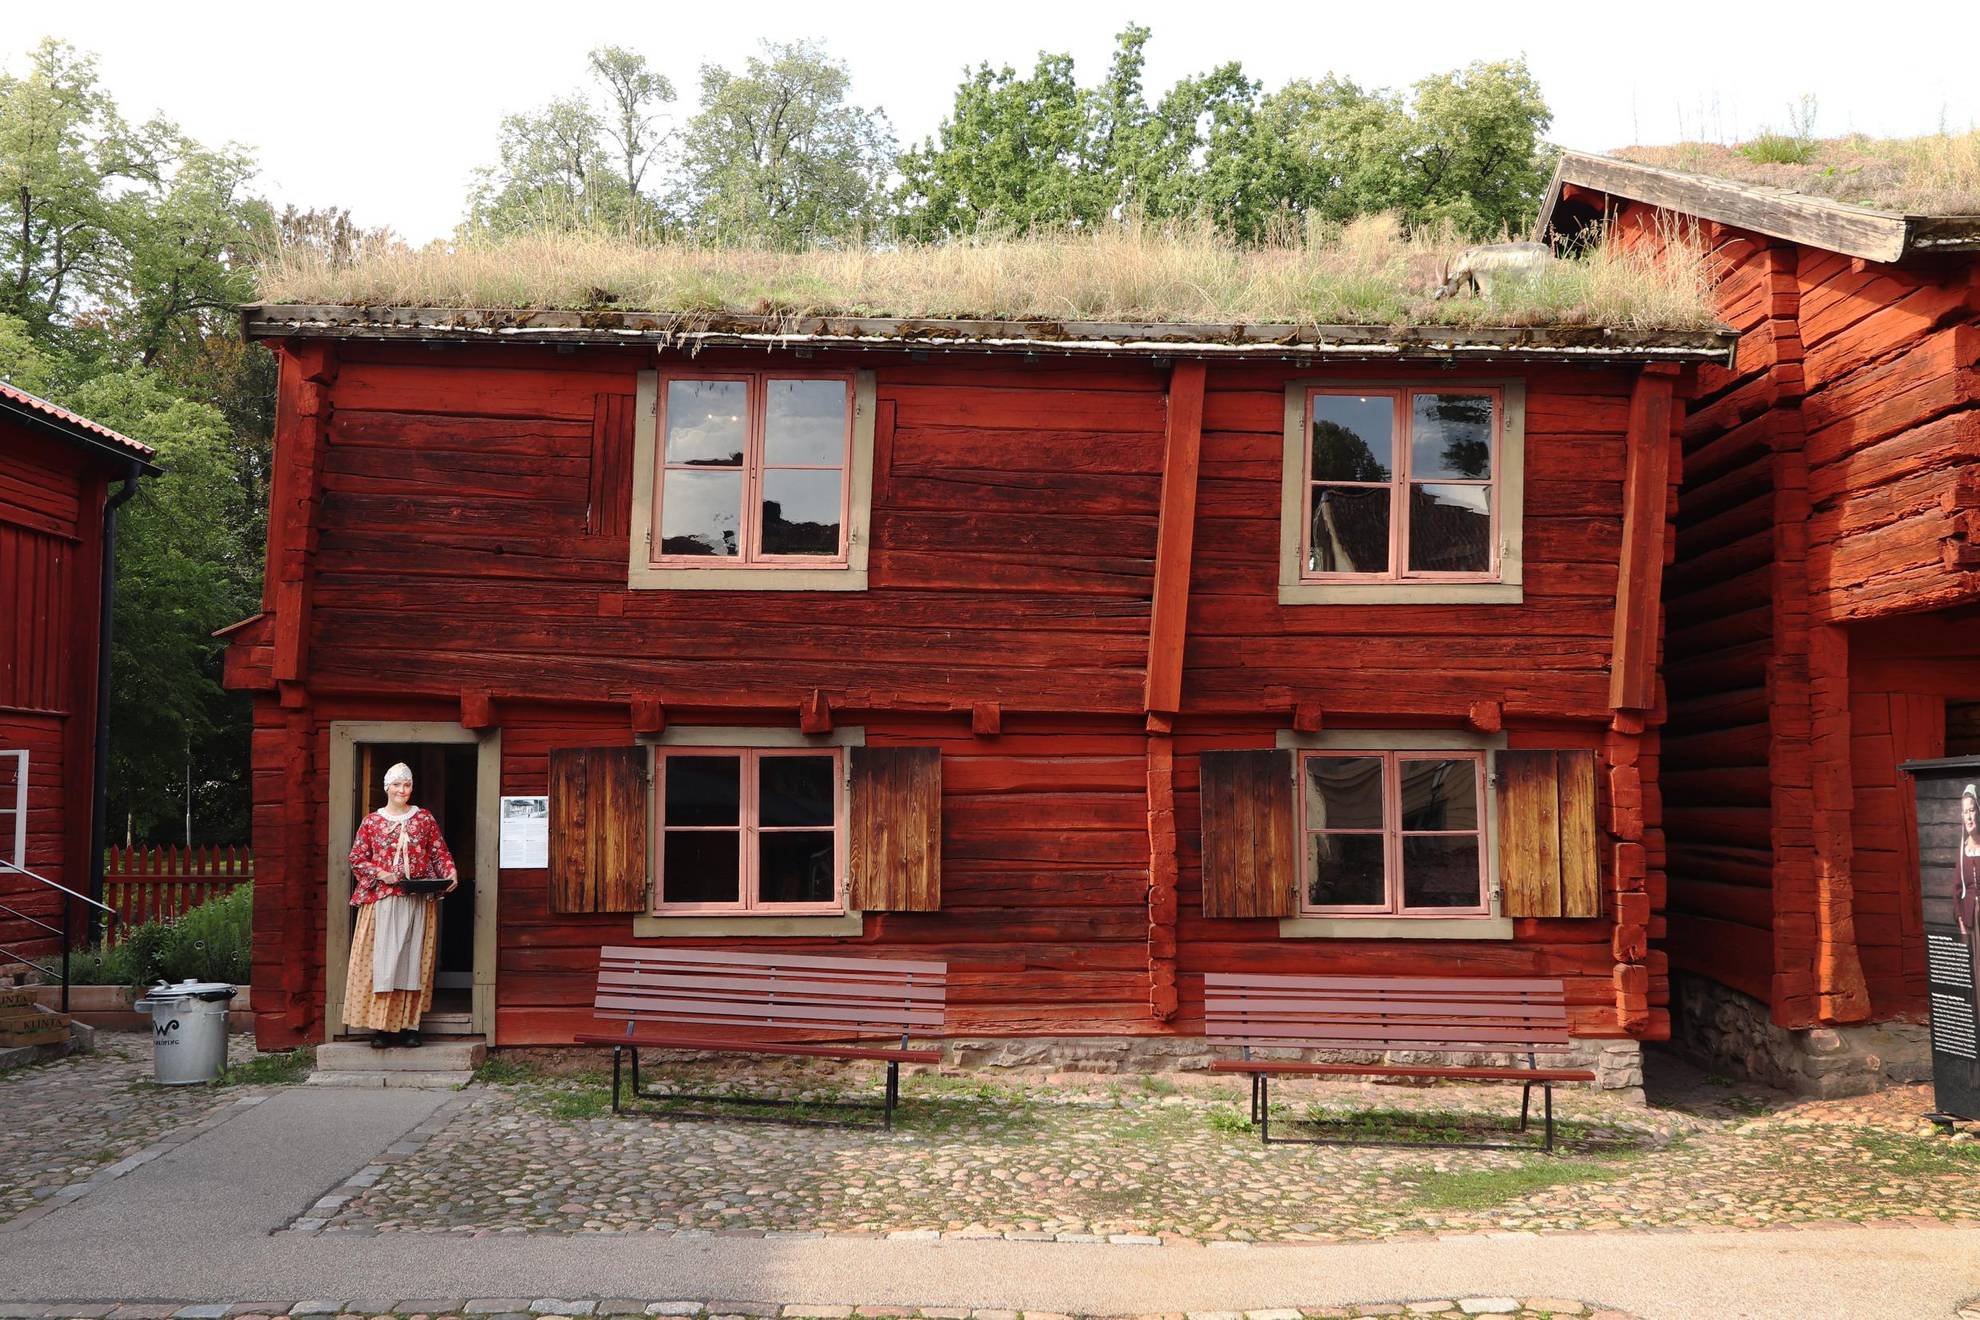 An old red painted wooden house with a sod roof. A women is standing at the entrance of the house.